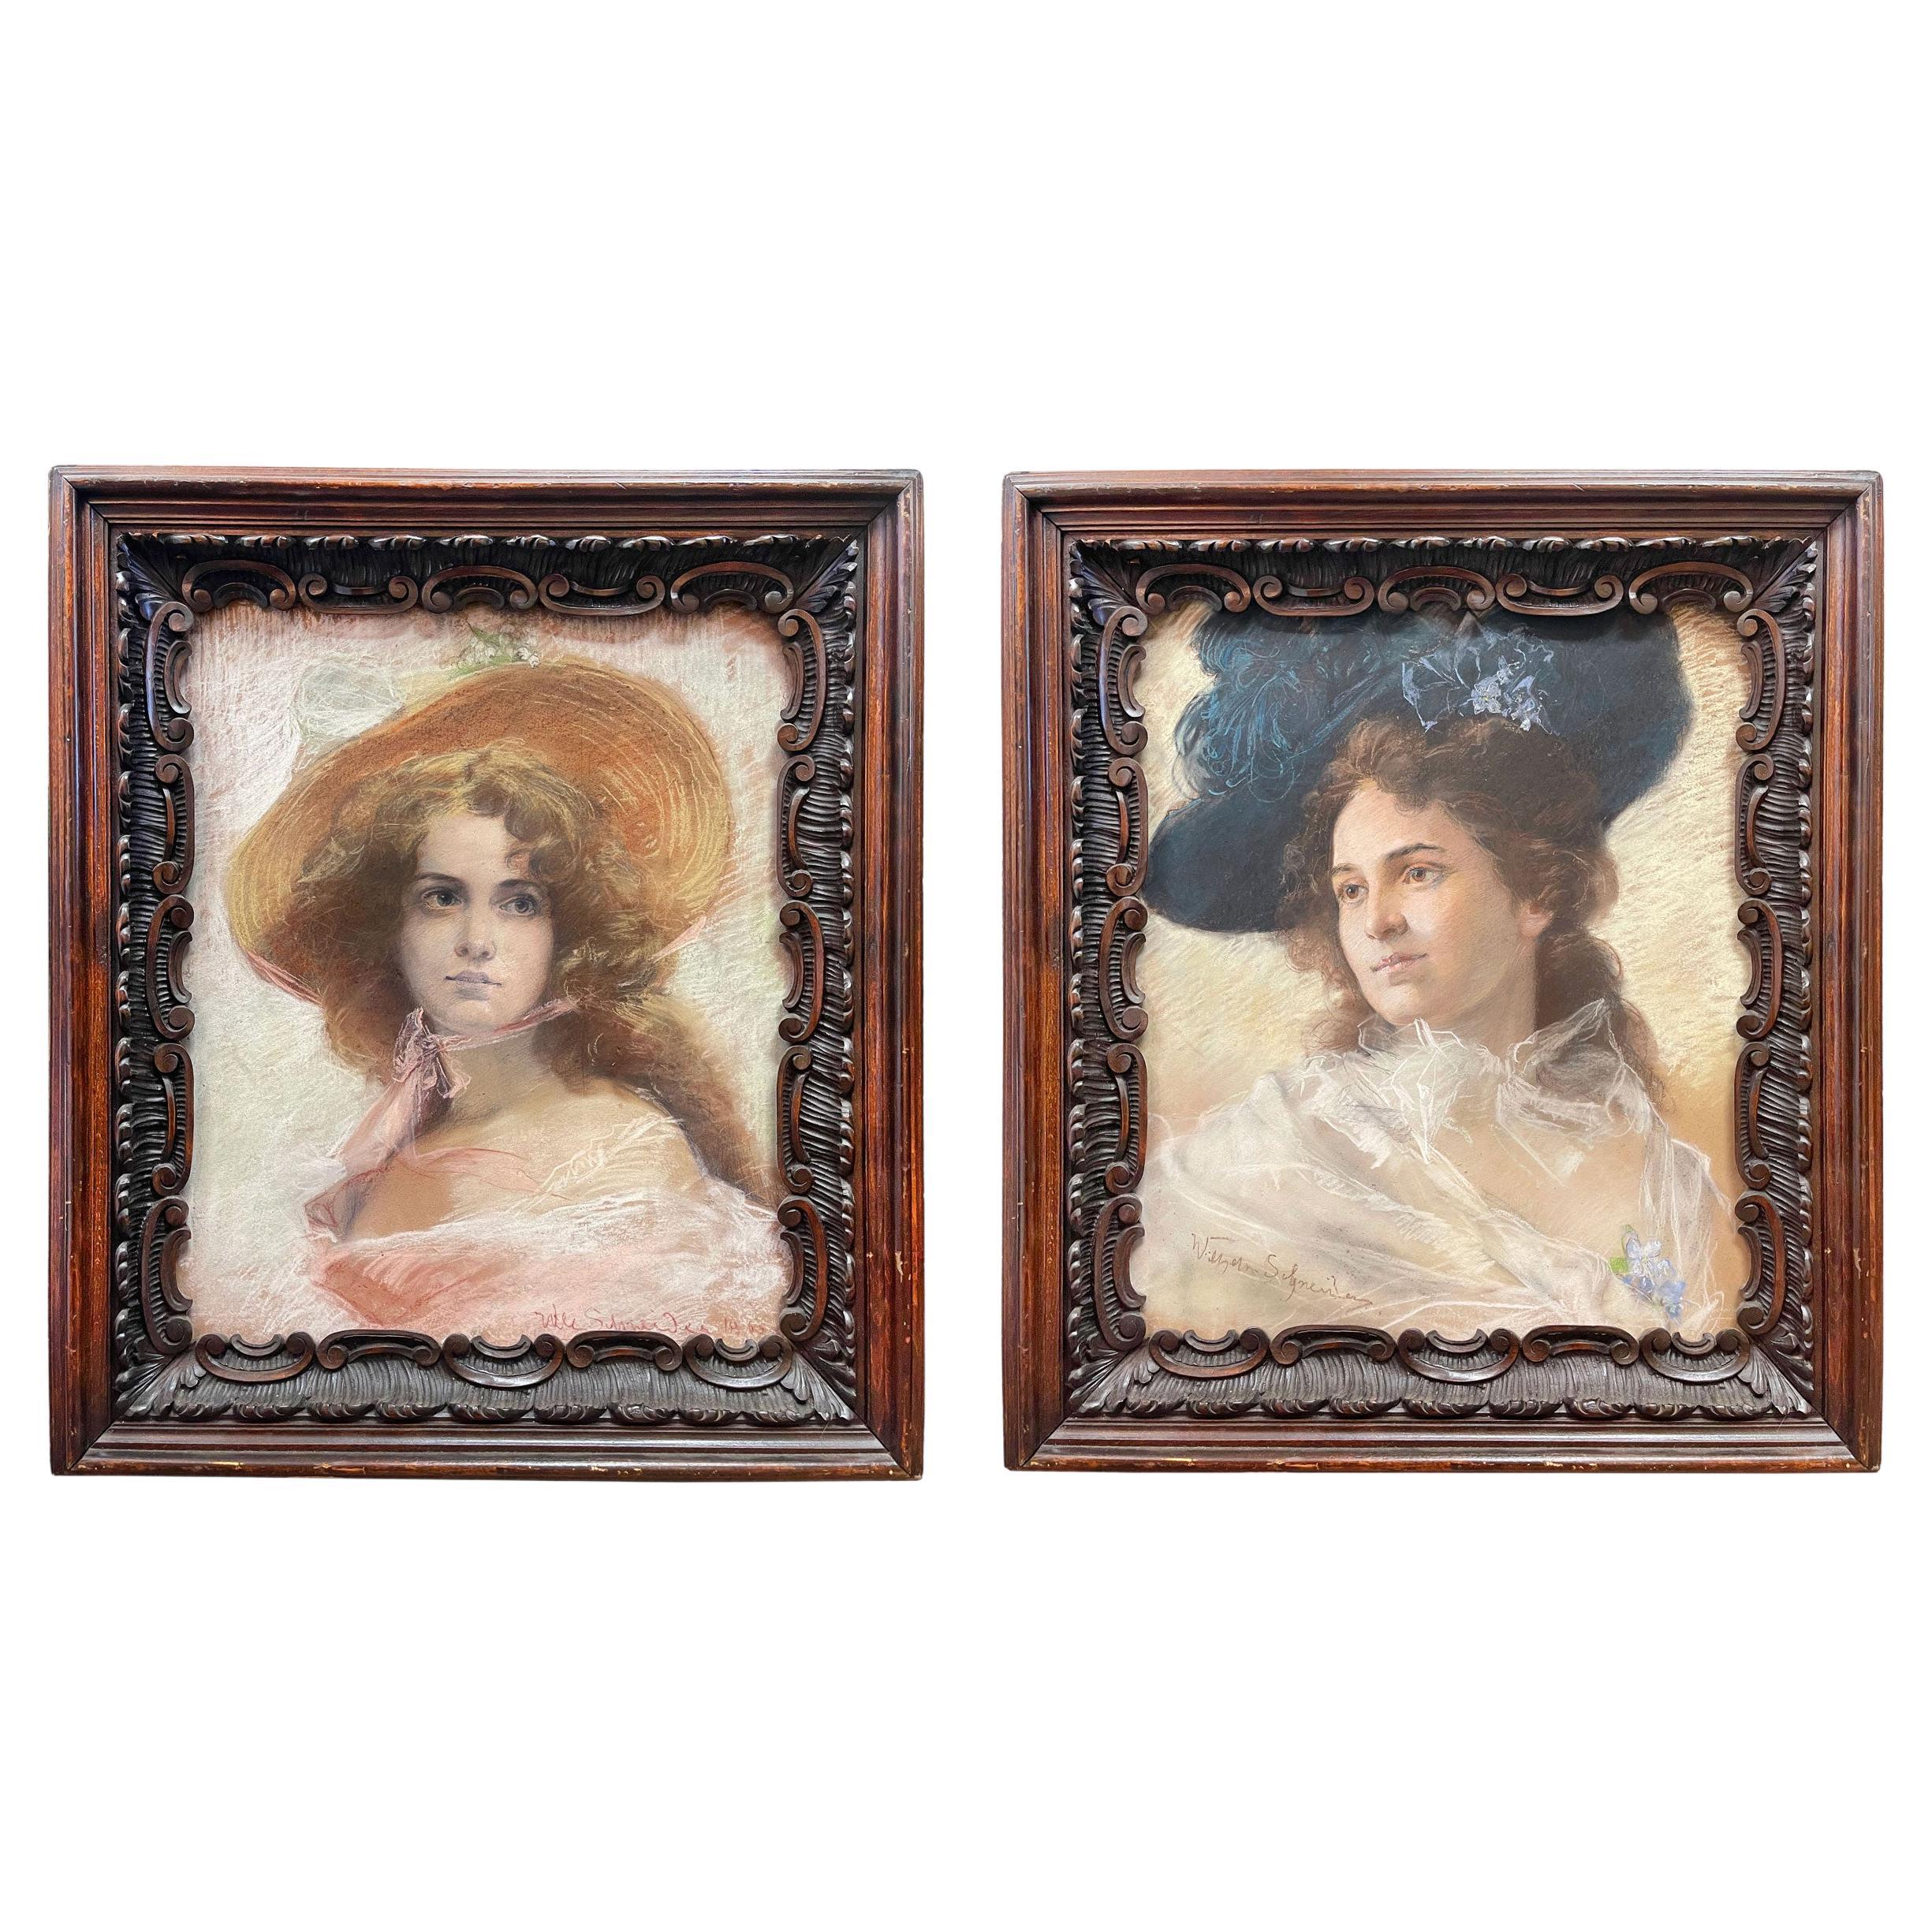 Pair of Mid 19th Century Portraits of Two Young Women Pastel Drawings